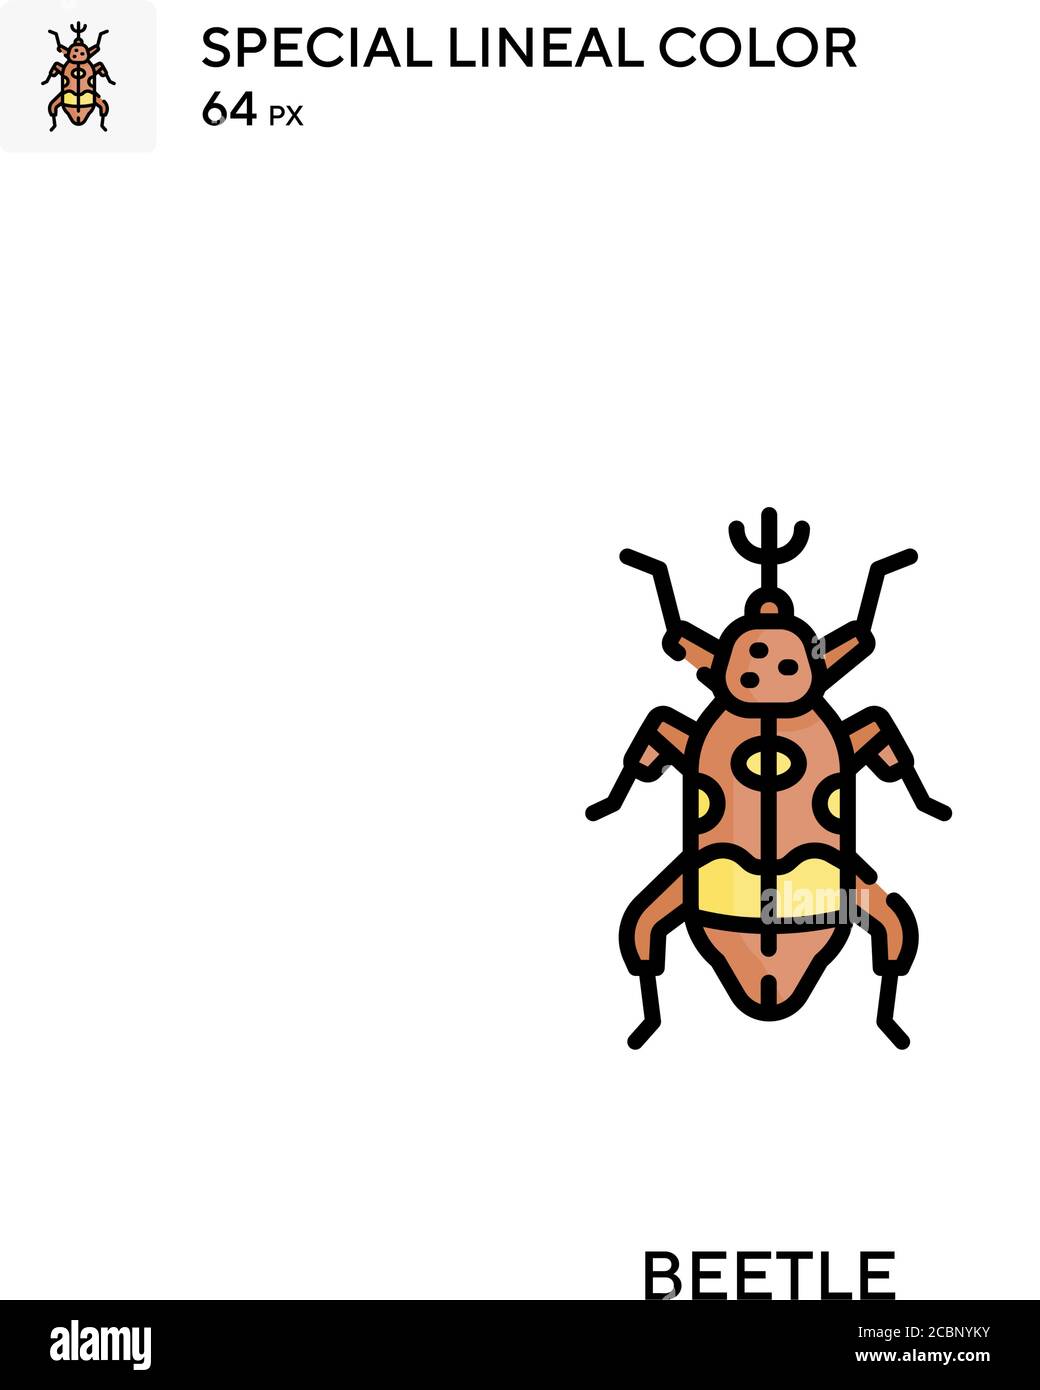 Beetle Special lineal color vector icon. Beetle icons for your business project Stock Vector